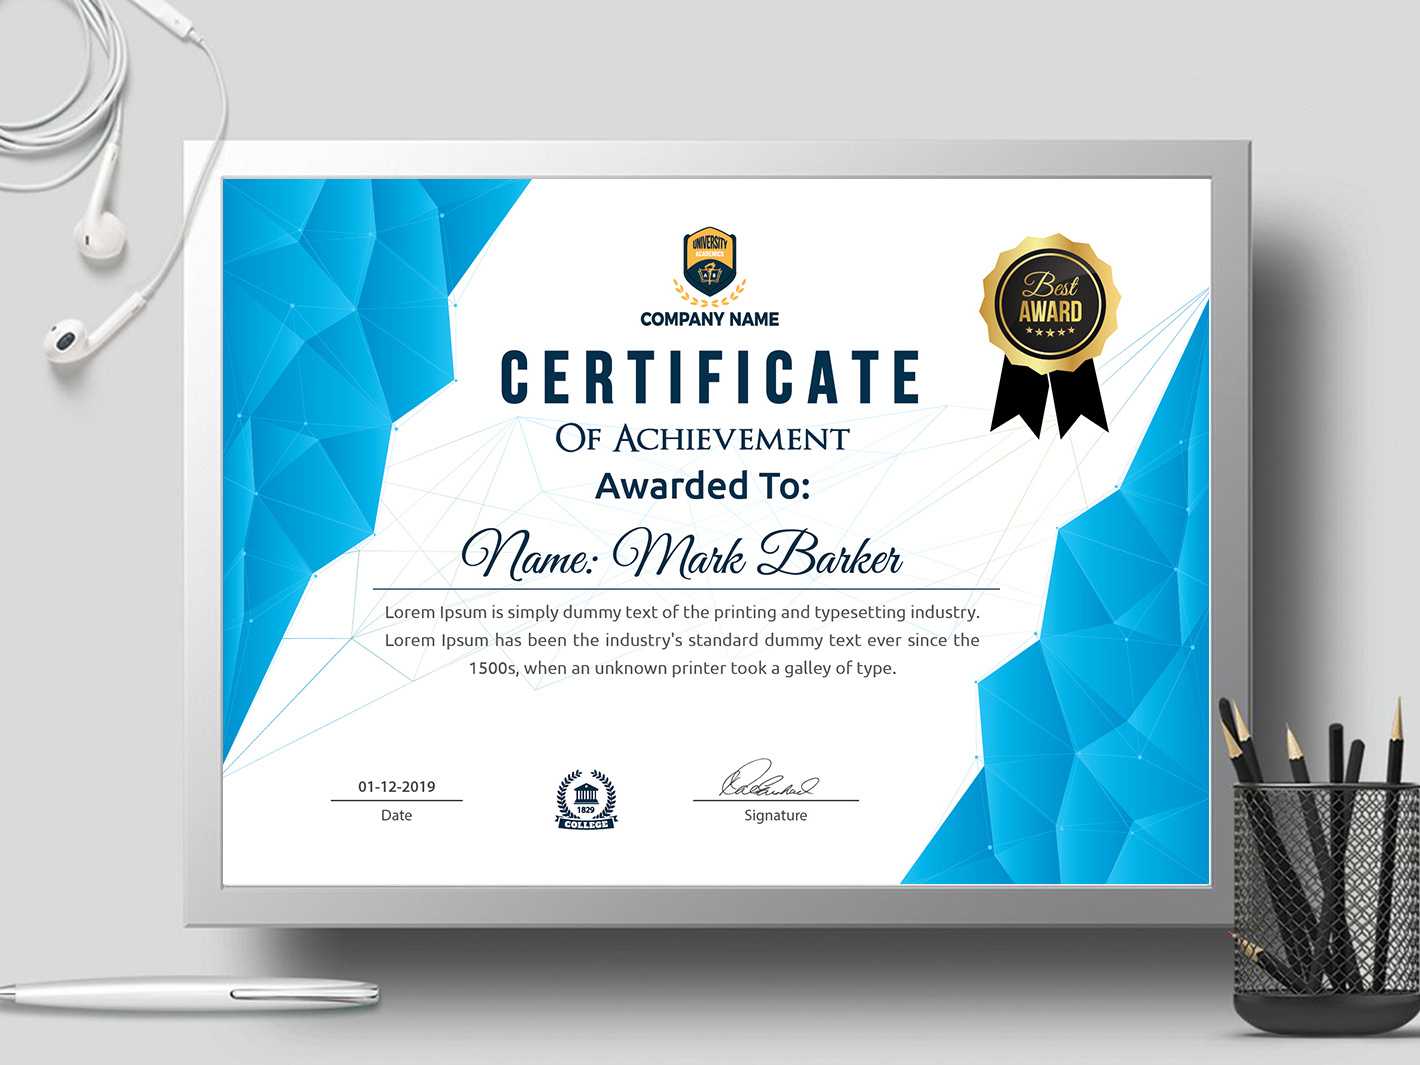 Certificate Templatecreative Touch On Dribbble With Design A Certificate Template